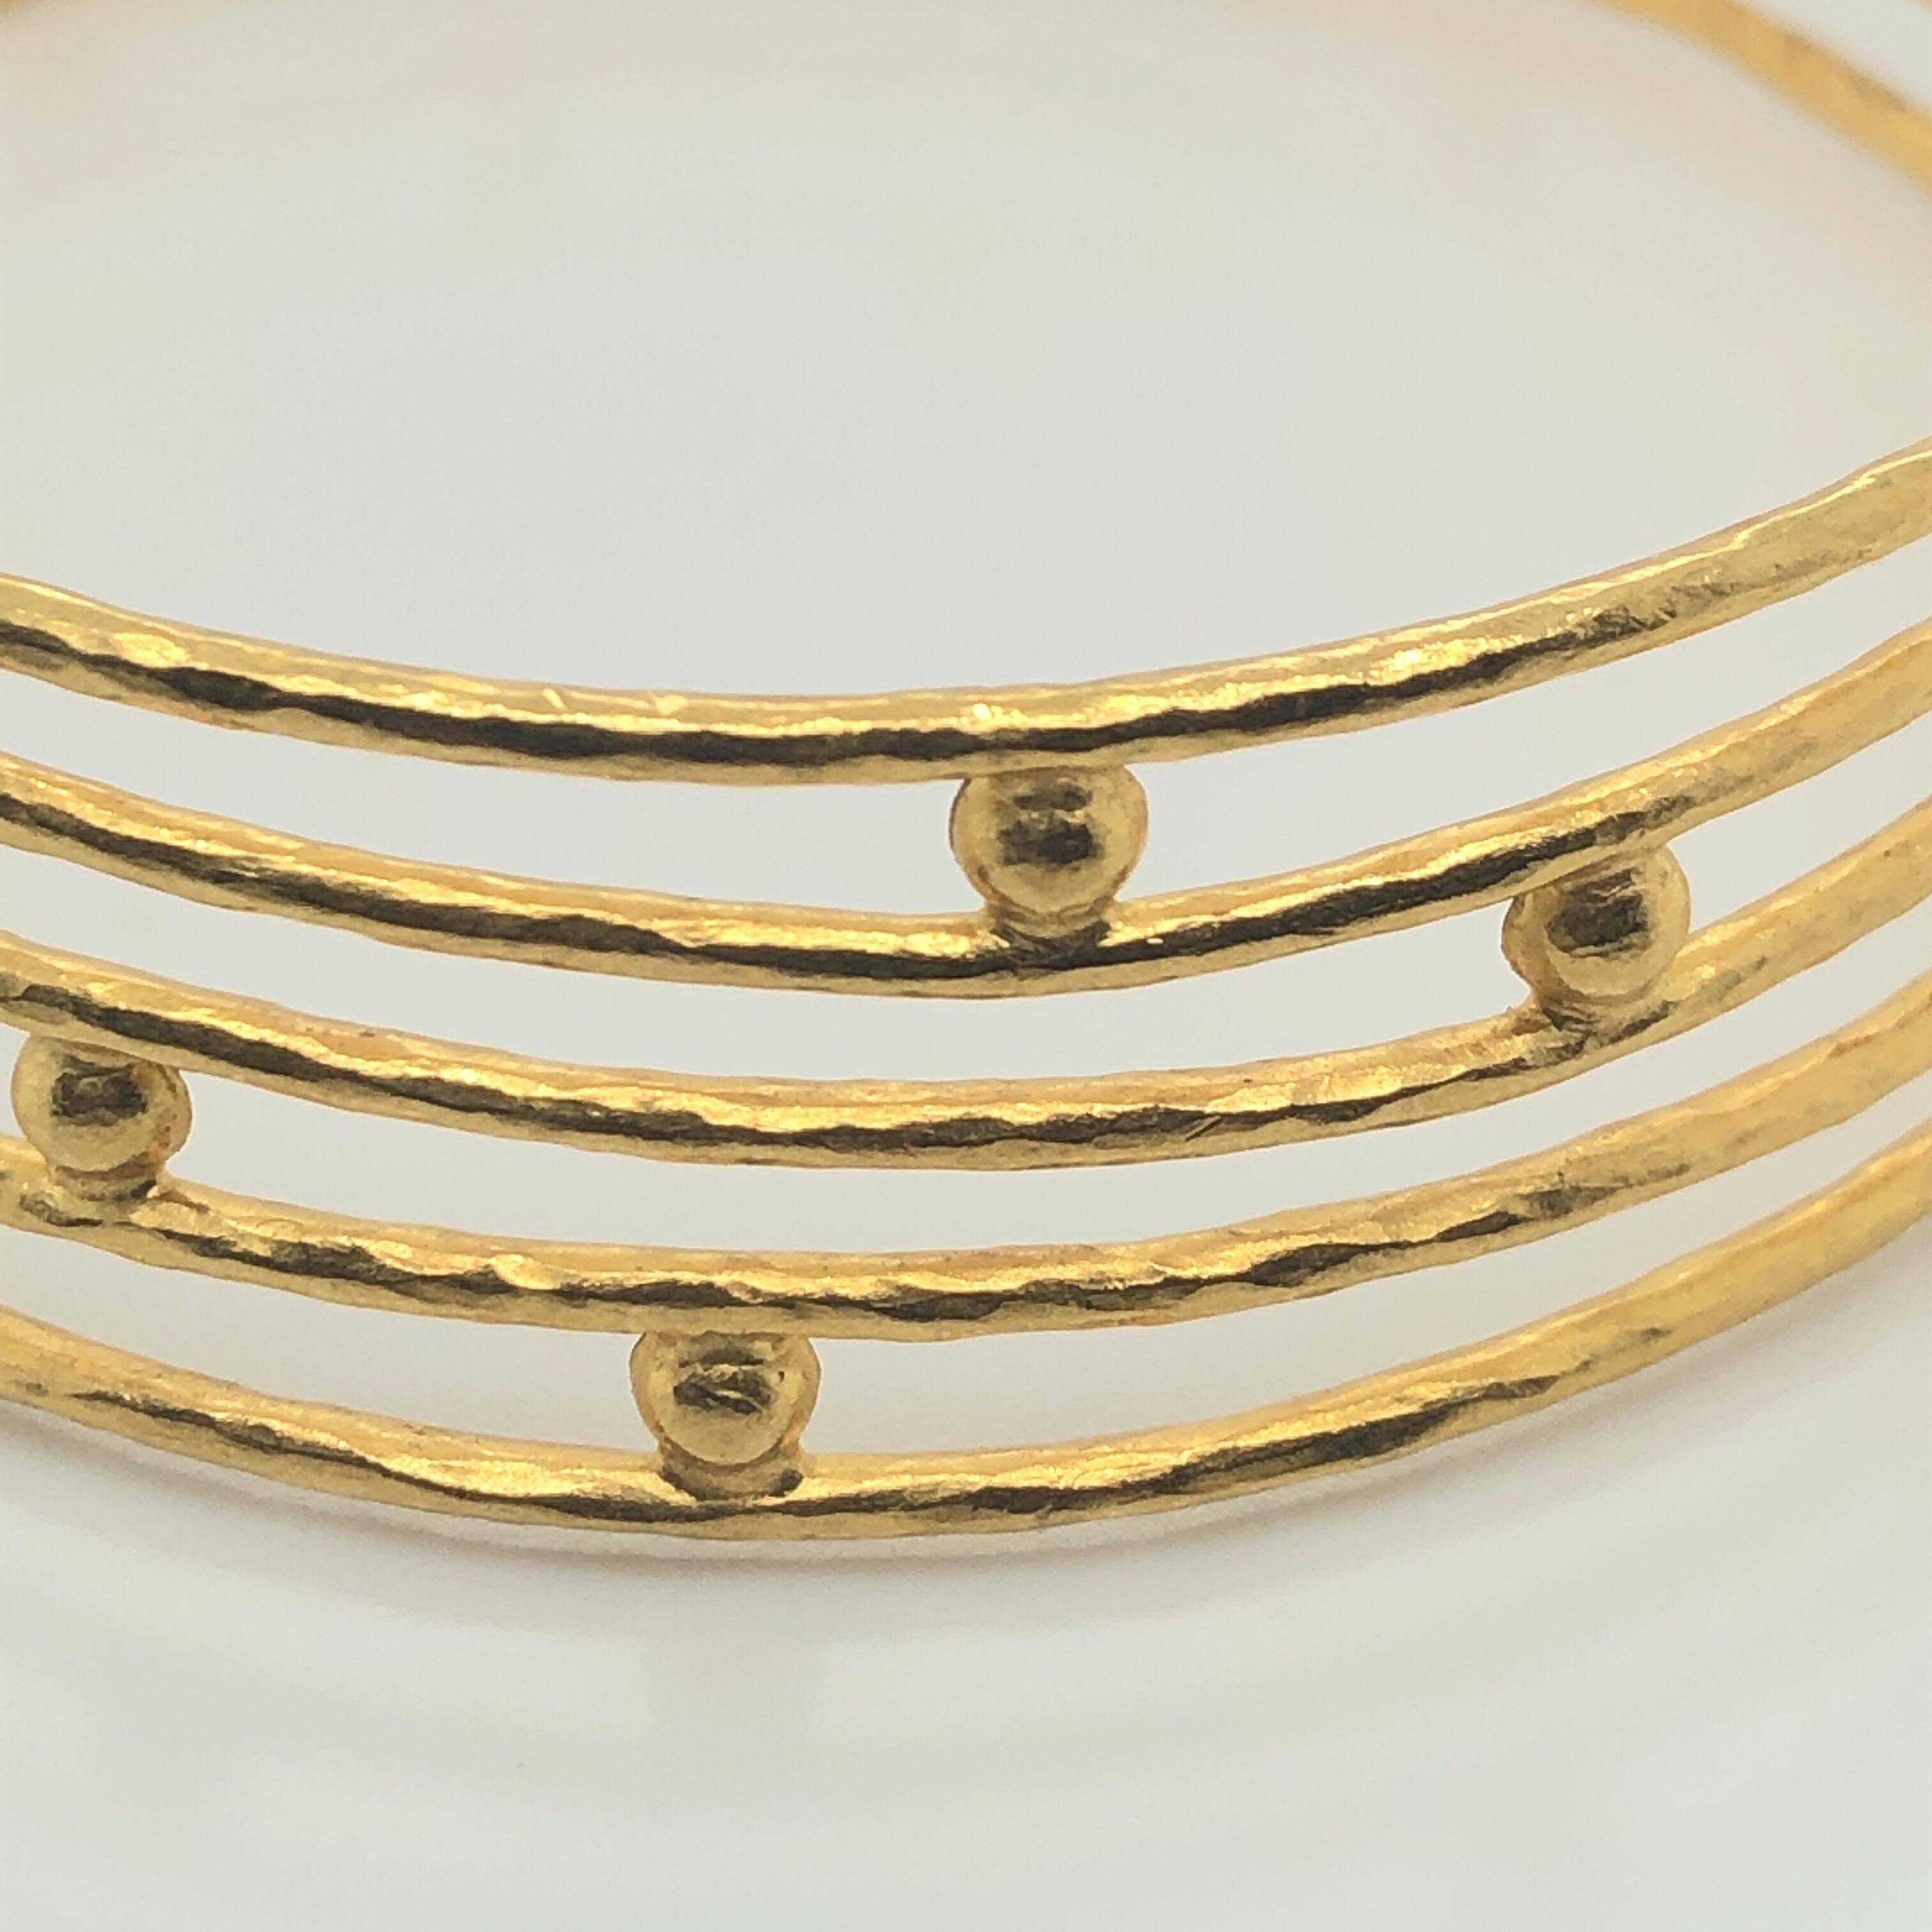 24k Yellow Gold Bangle by Gurhan. Stamped DG.